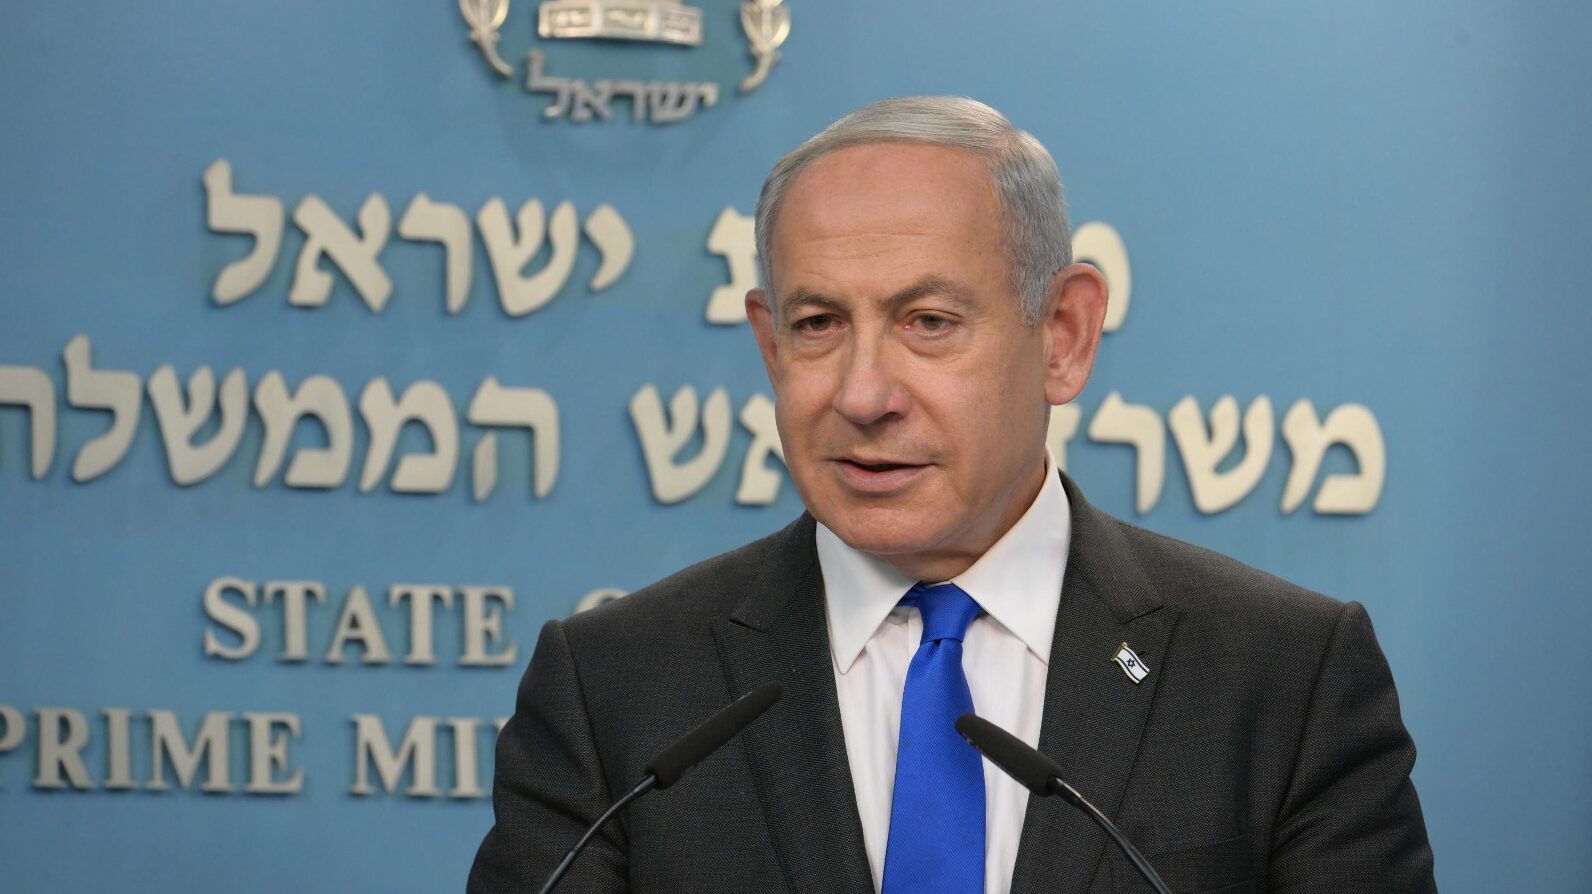 Netanyahu Cancels Appearance at Jewish Federations Event Amid Planned Protests